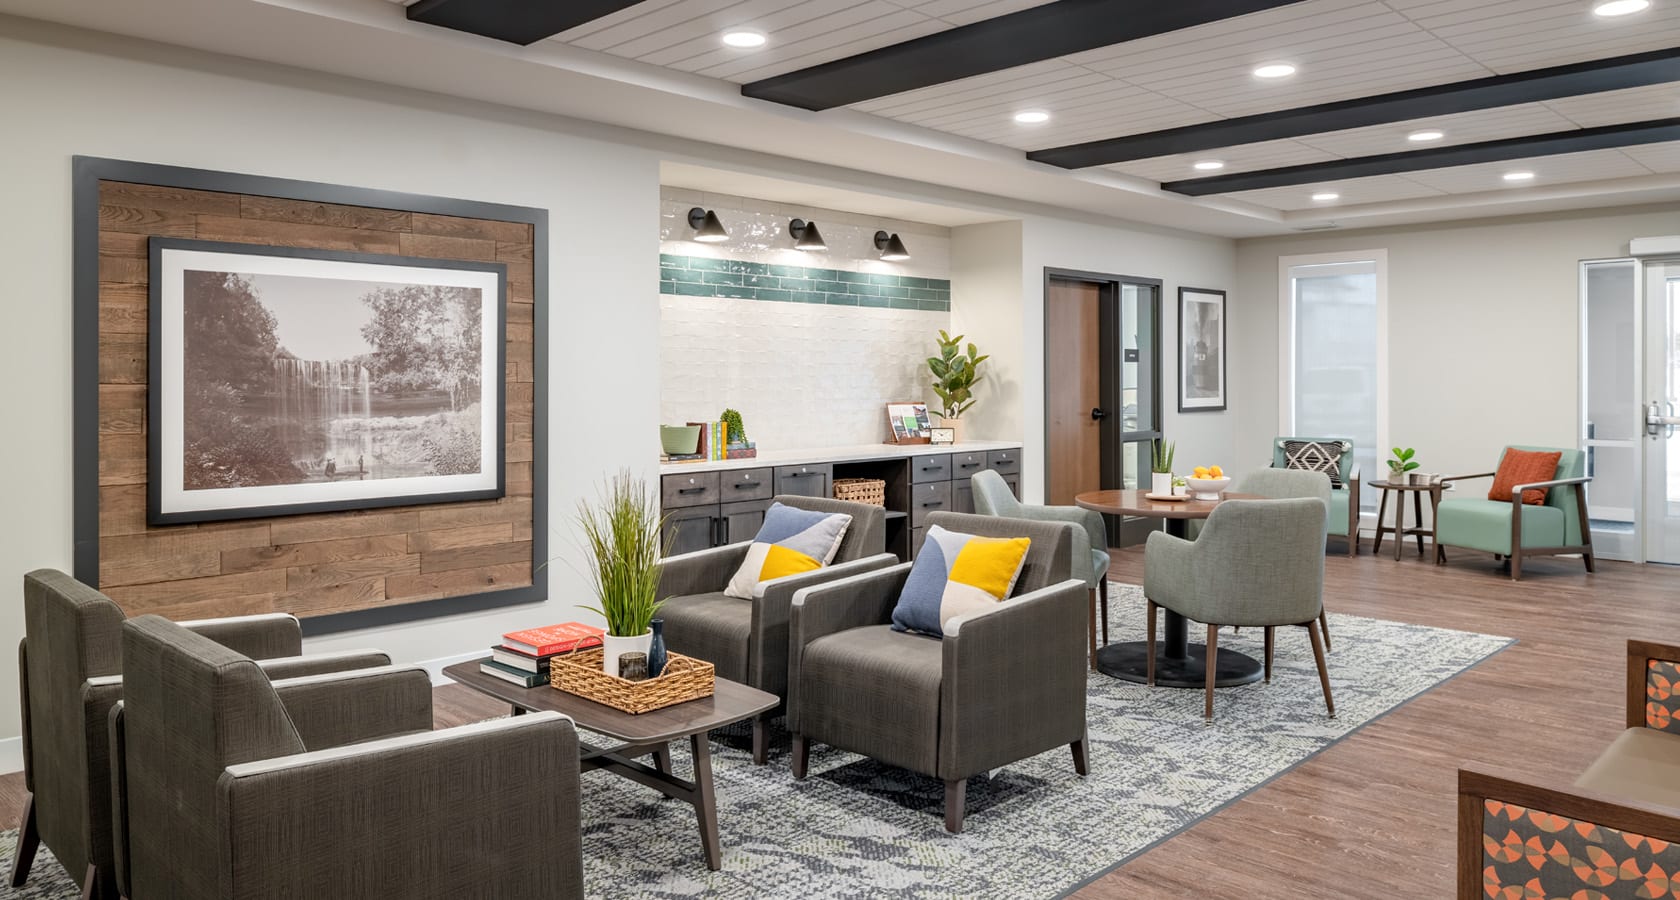 The Hillock  Affordable Housing for Seniors 55+ in Minneapolis